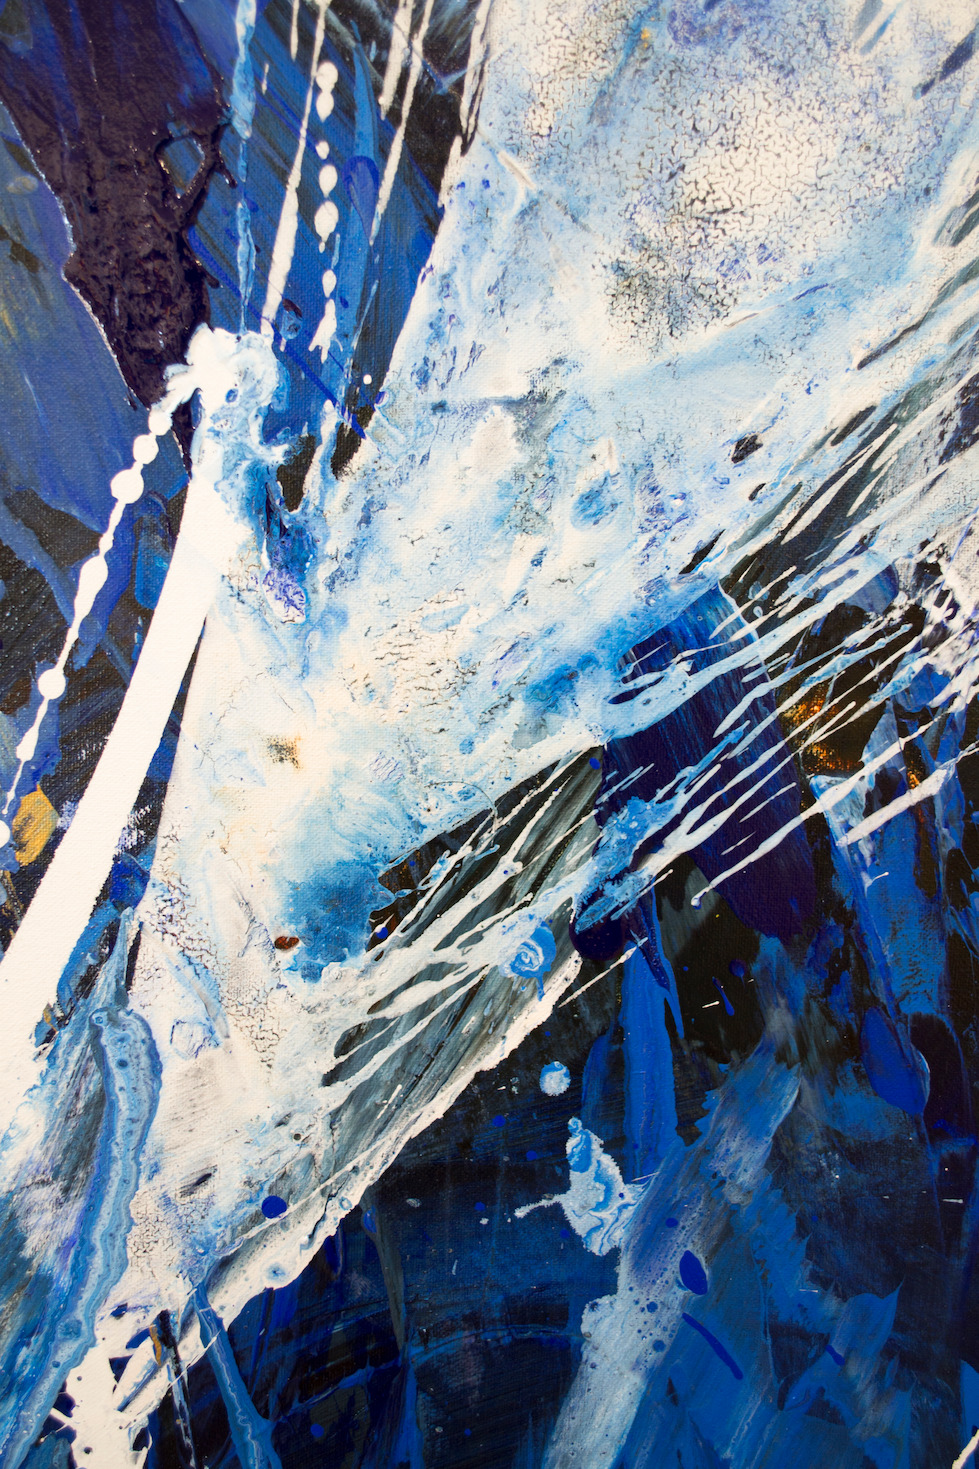 Close Up Detail 2 Of Acrylic Painting "Ocean Blues" By Judith Dalozzo